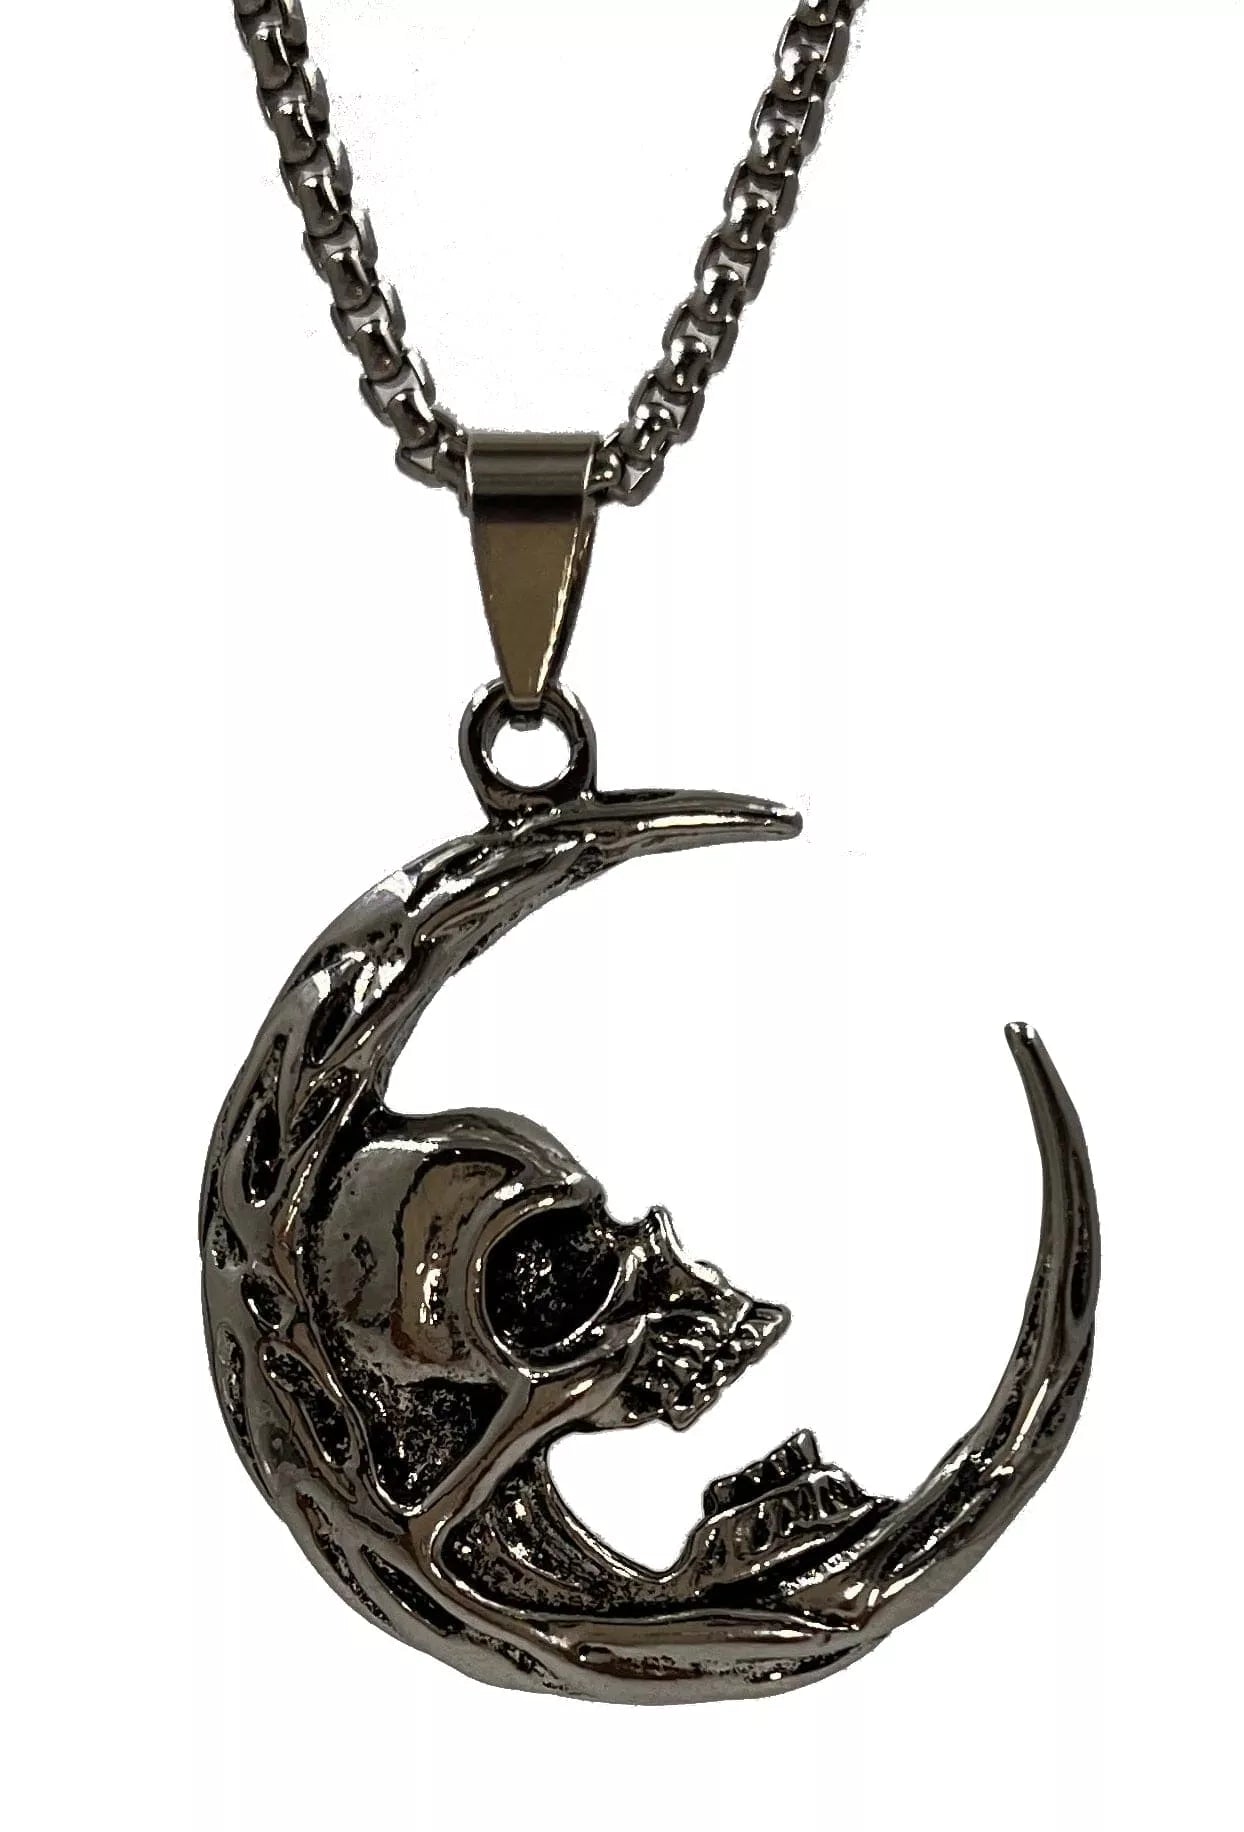 THE MEN THING Alloy Moon Skull Pendant with Pure Stainless Steel 24inch Chain for Men, European trending Style - Round Box Chain & Pendant for Men & Boy